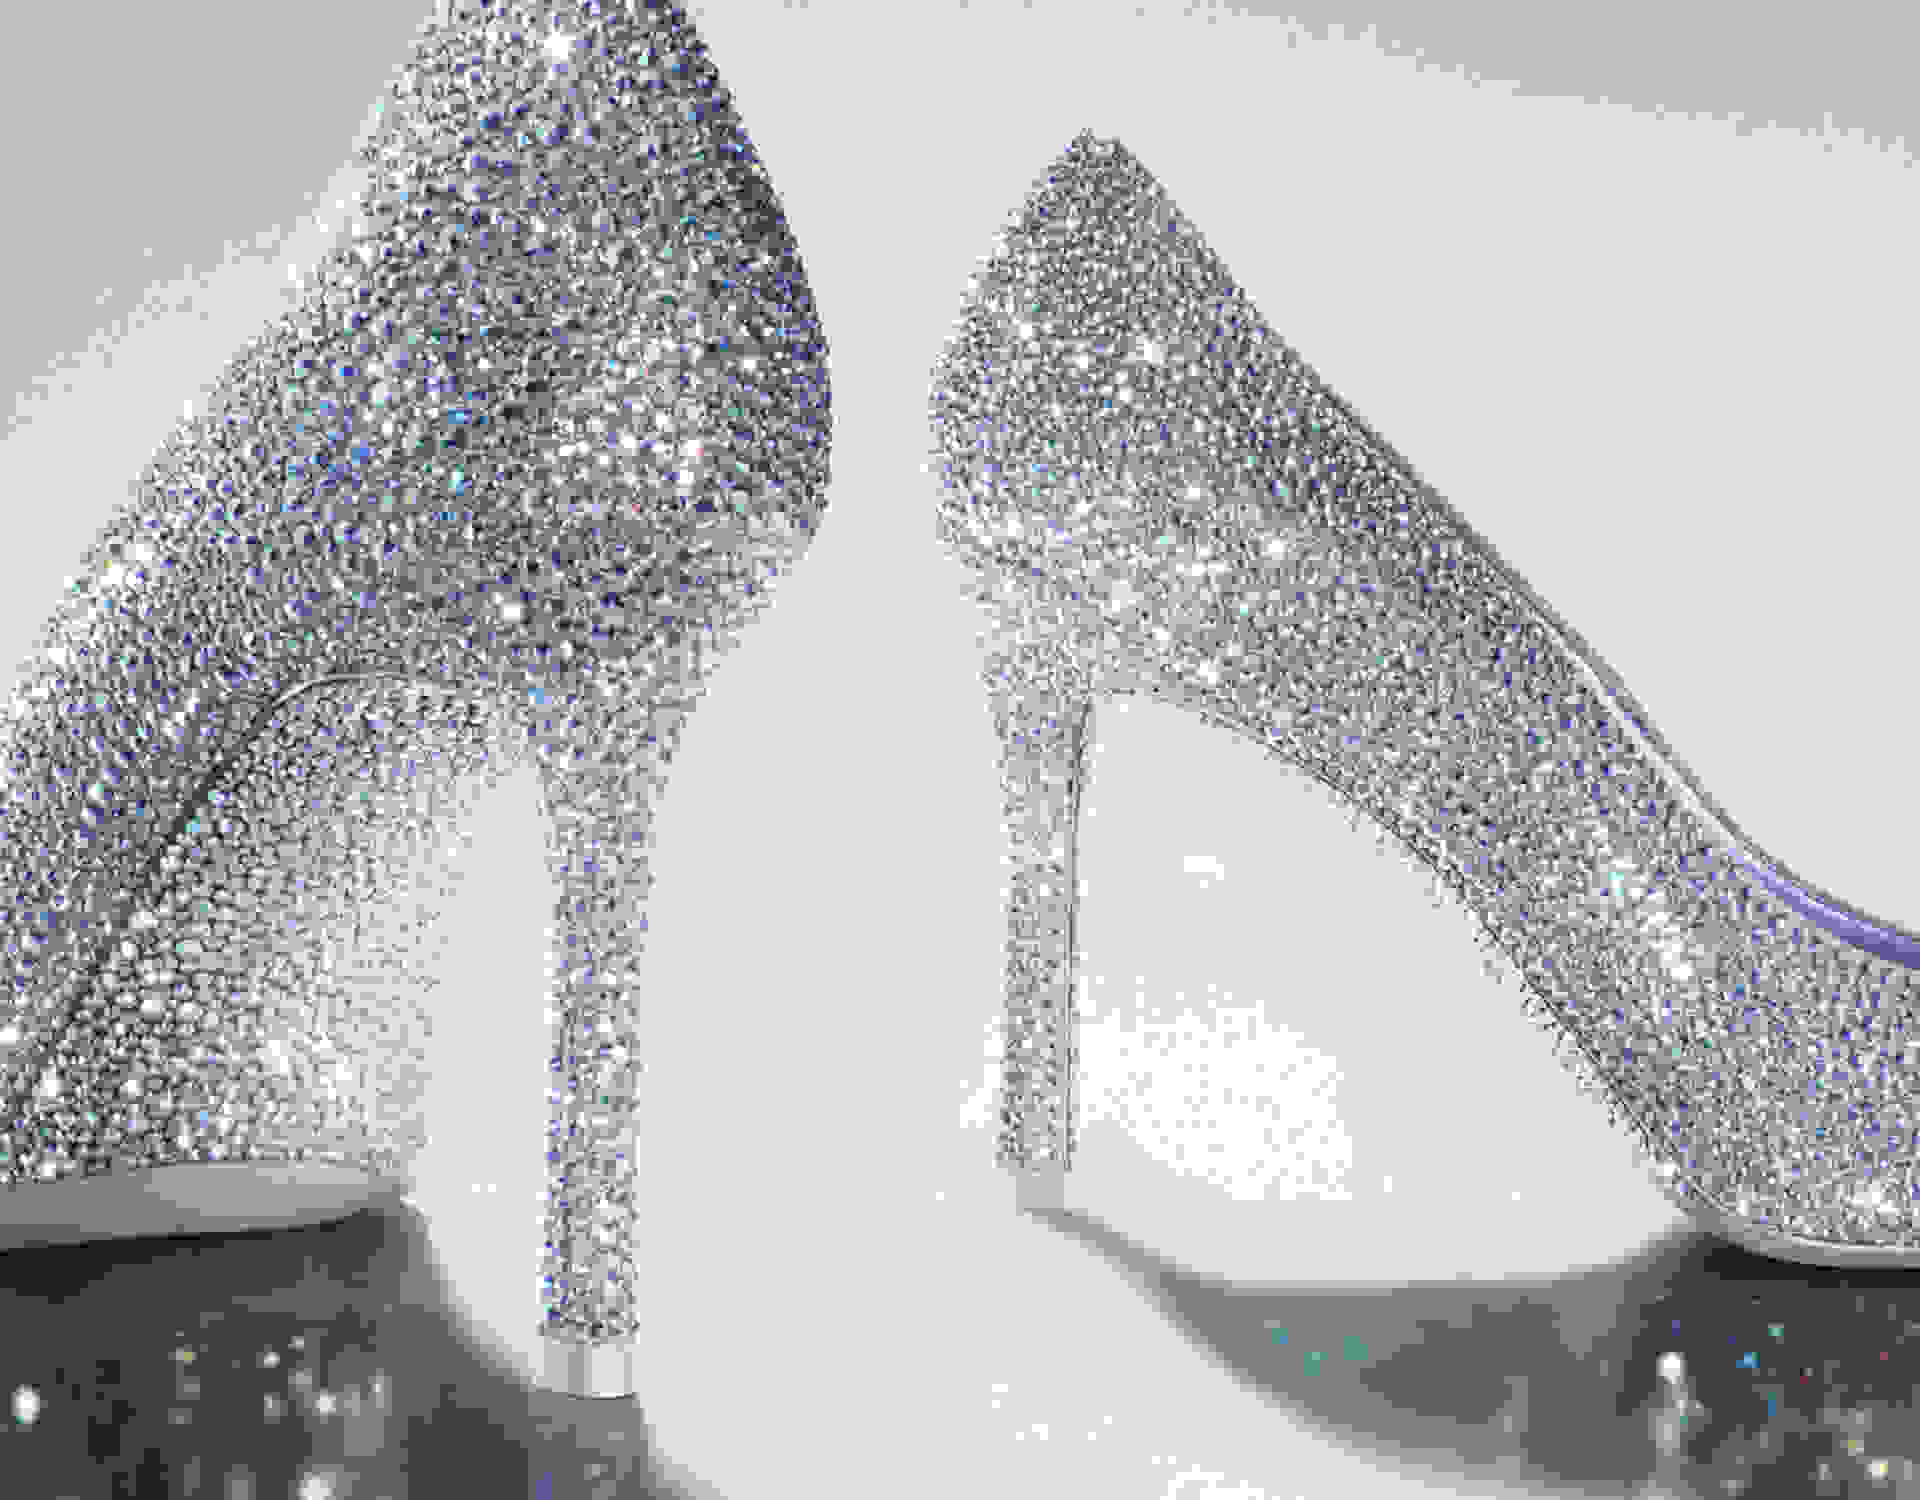  The Crystal Pumps